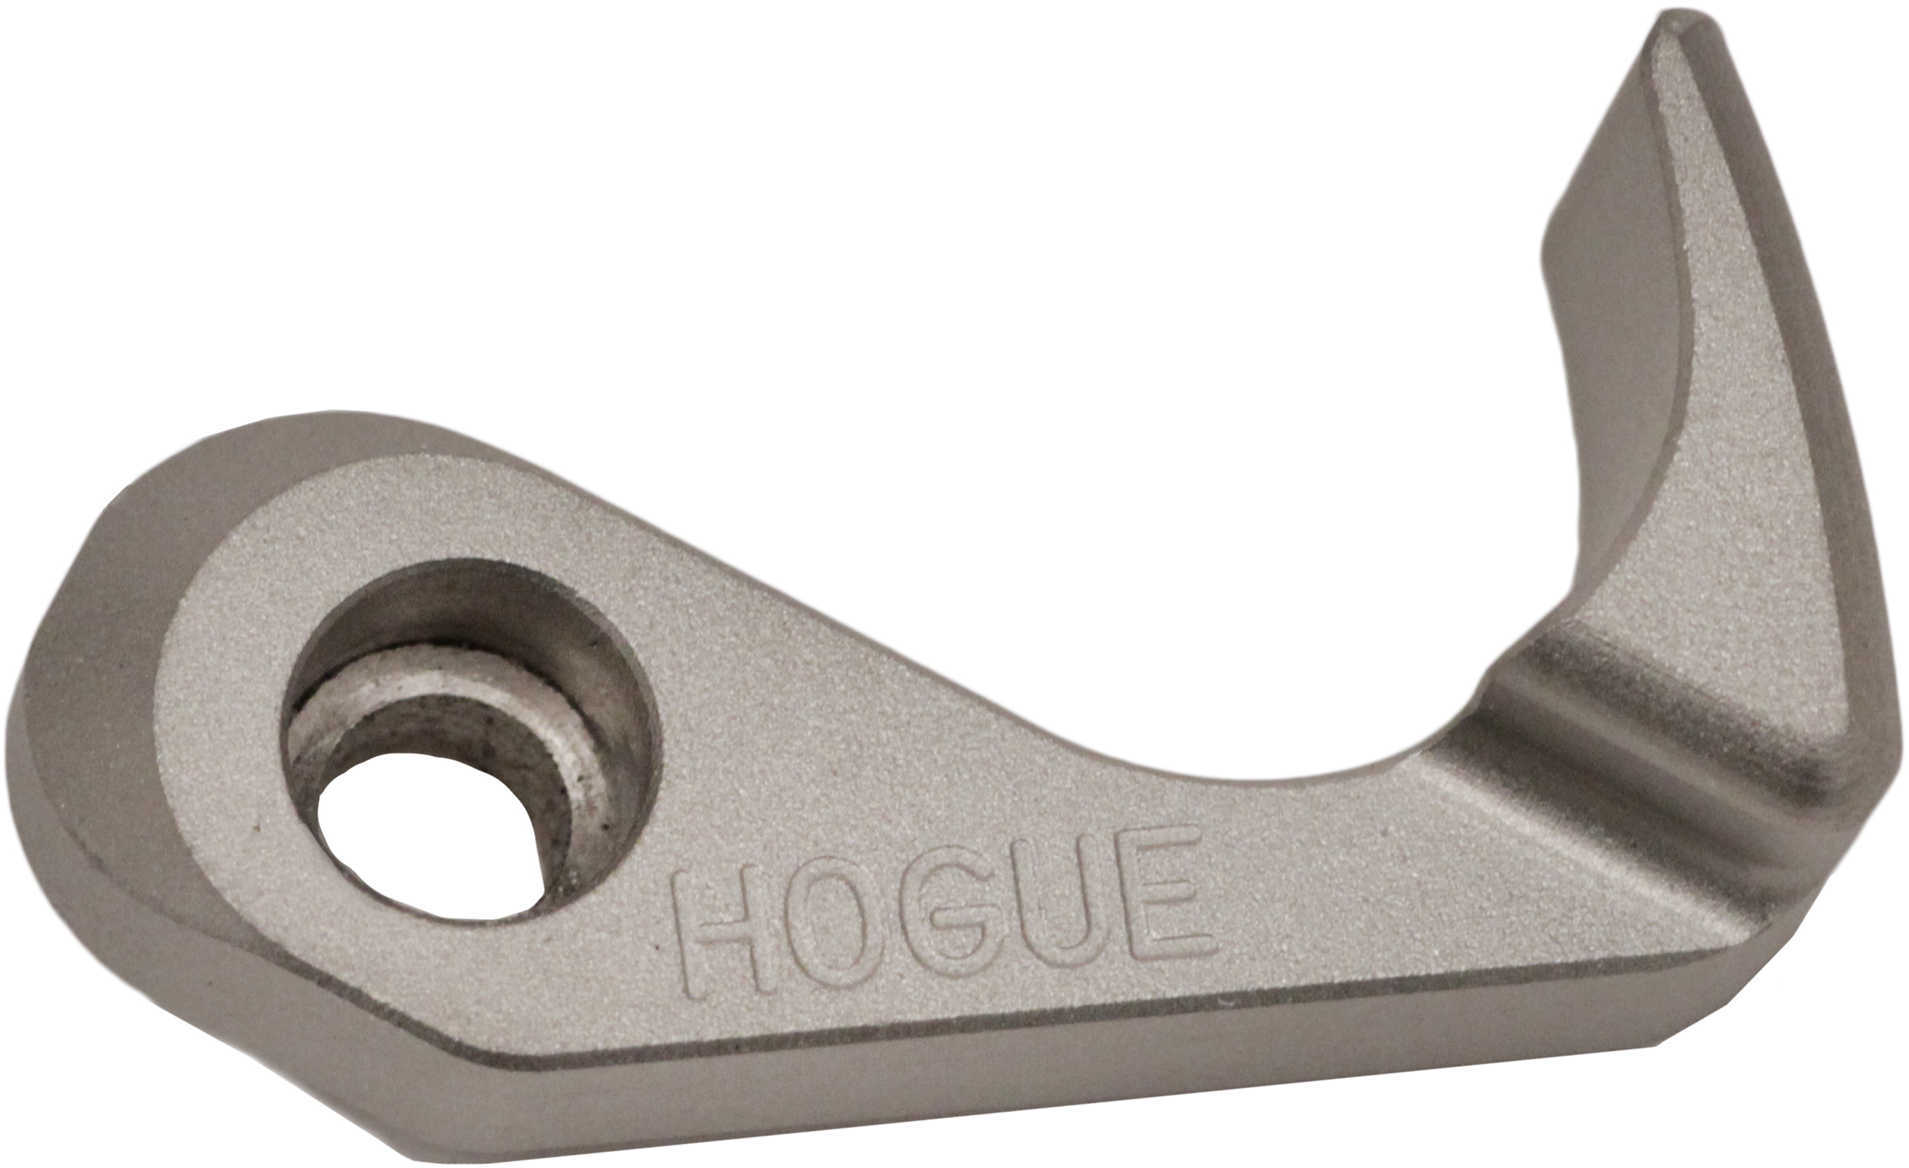 Hogue S&W Cylinder Release Long, Stainless Steel 00686